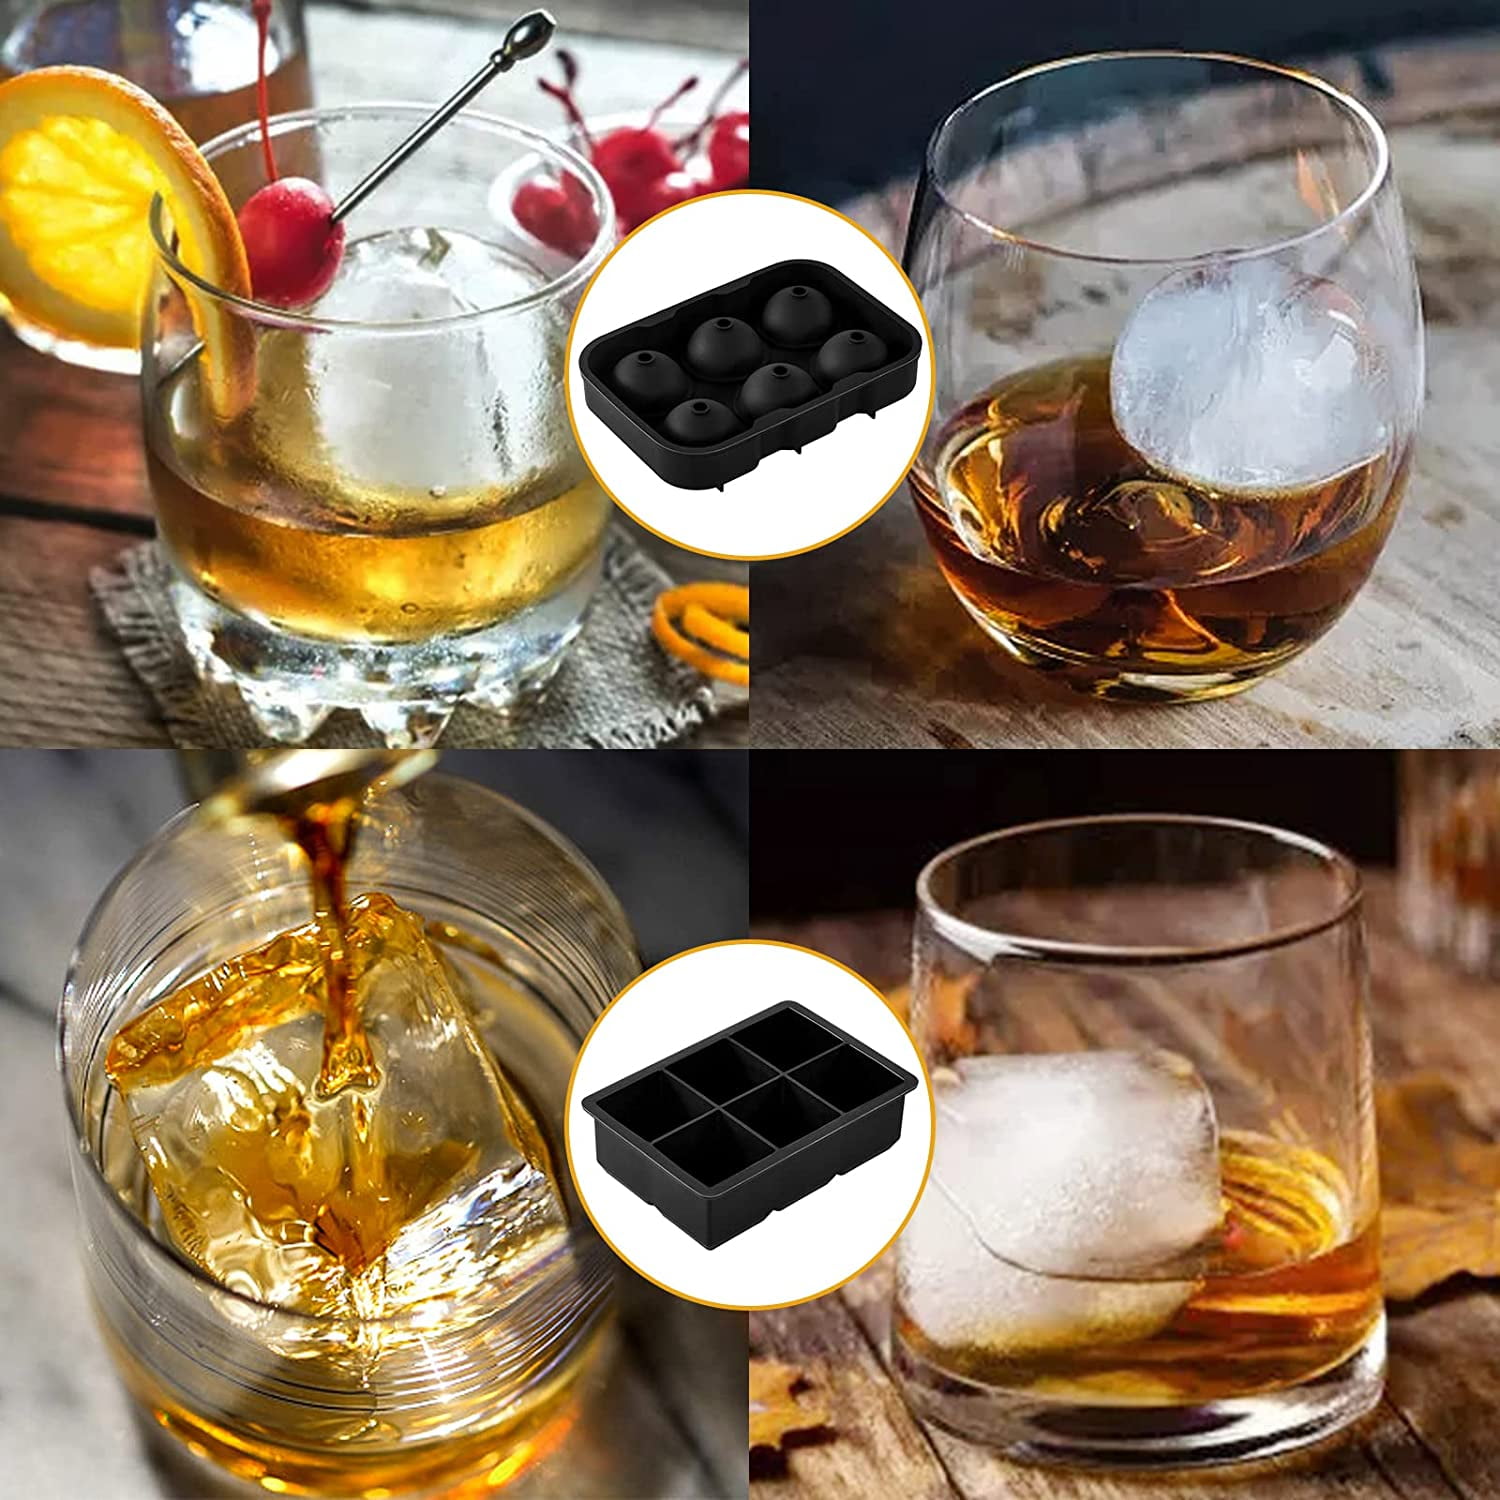 Large Square Ice Cube Tray with Lid – Shop Our Favorites